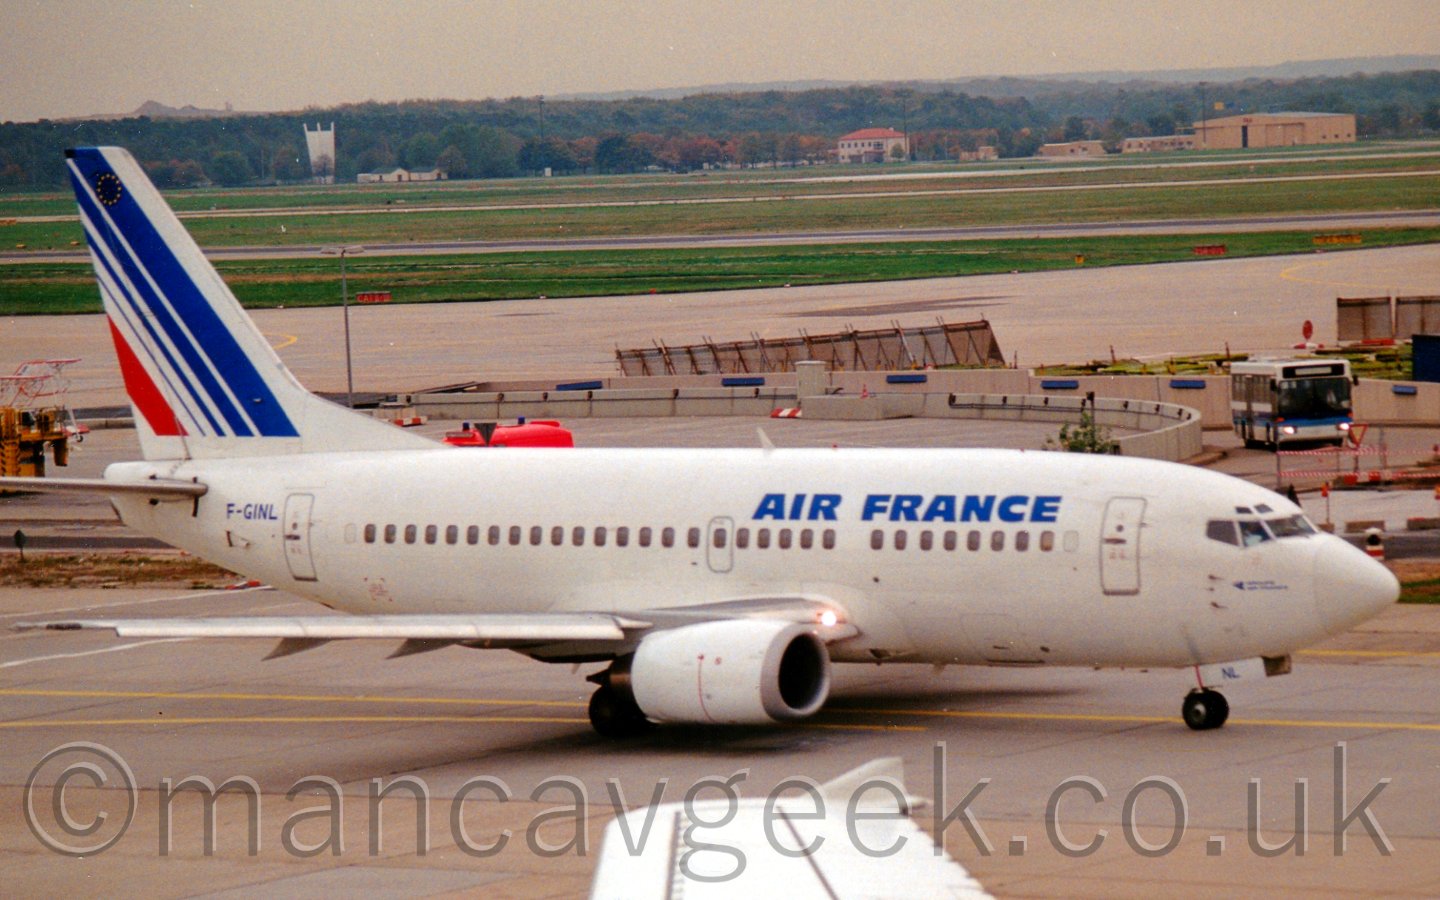 Side view of a twin engined white jet airliner with blue "Air France" titles on the upper forward fuselage and diagonal blue and red stripes on the tail taxiing from left to right.